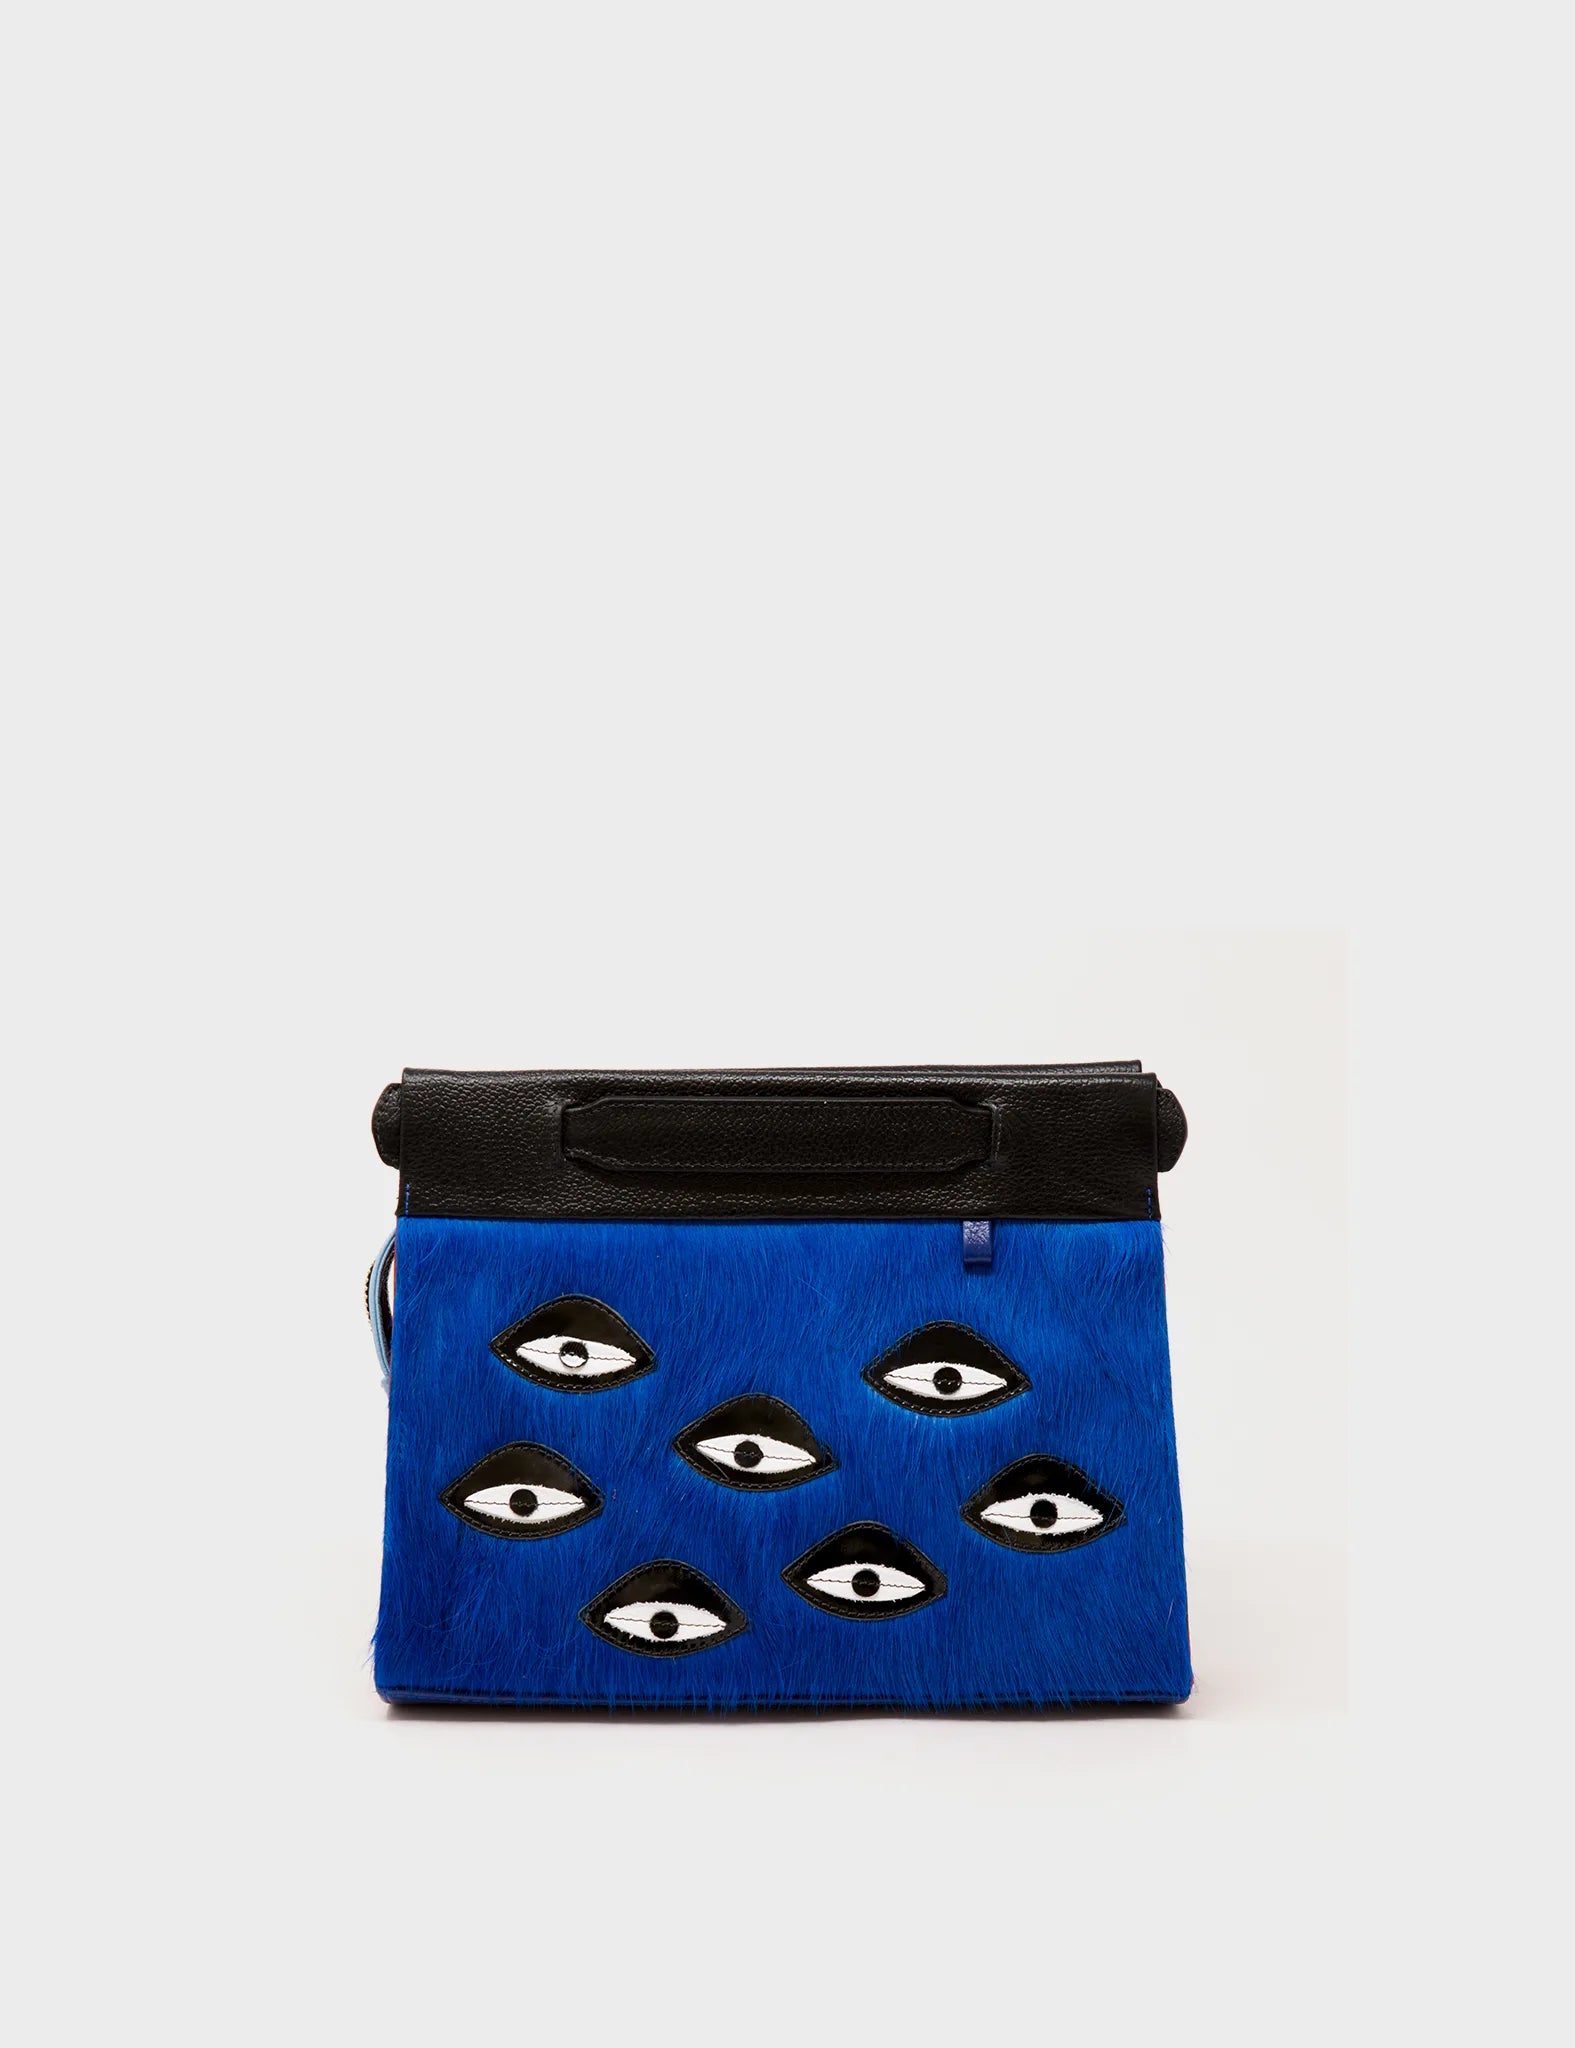 Crossbody Small Royal Blue And Black Leather Bag - Eyes Applique Adjustable Handle - Front 